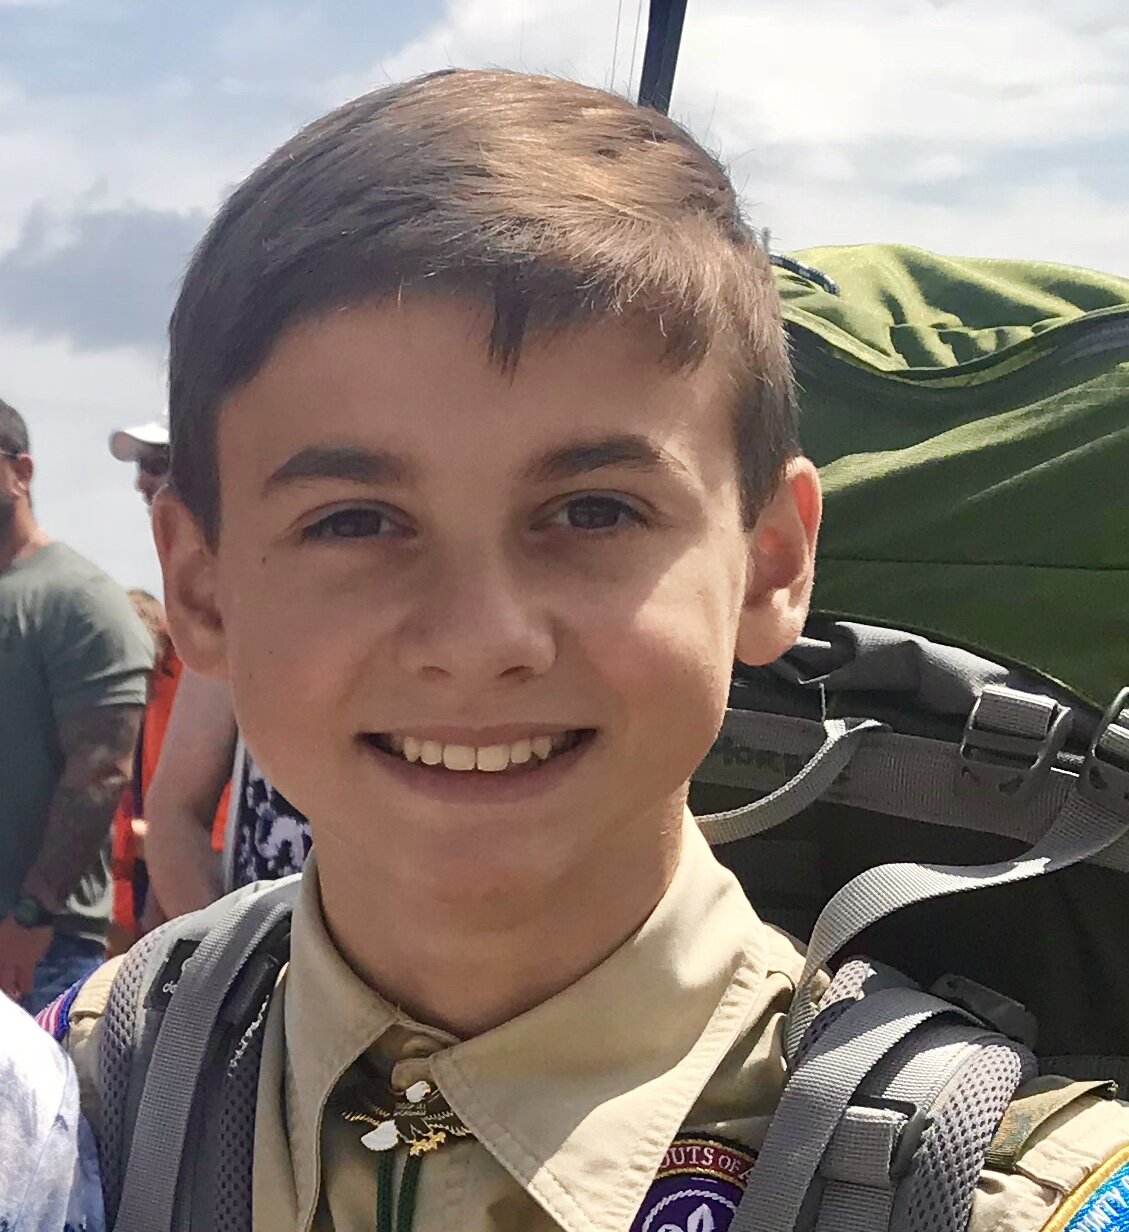 Boy Scout Andrew McMorris was killed in the fatal DWI accident